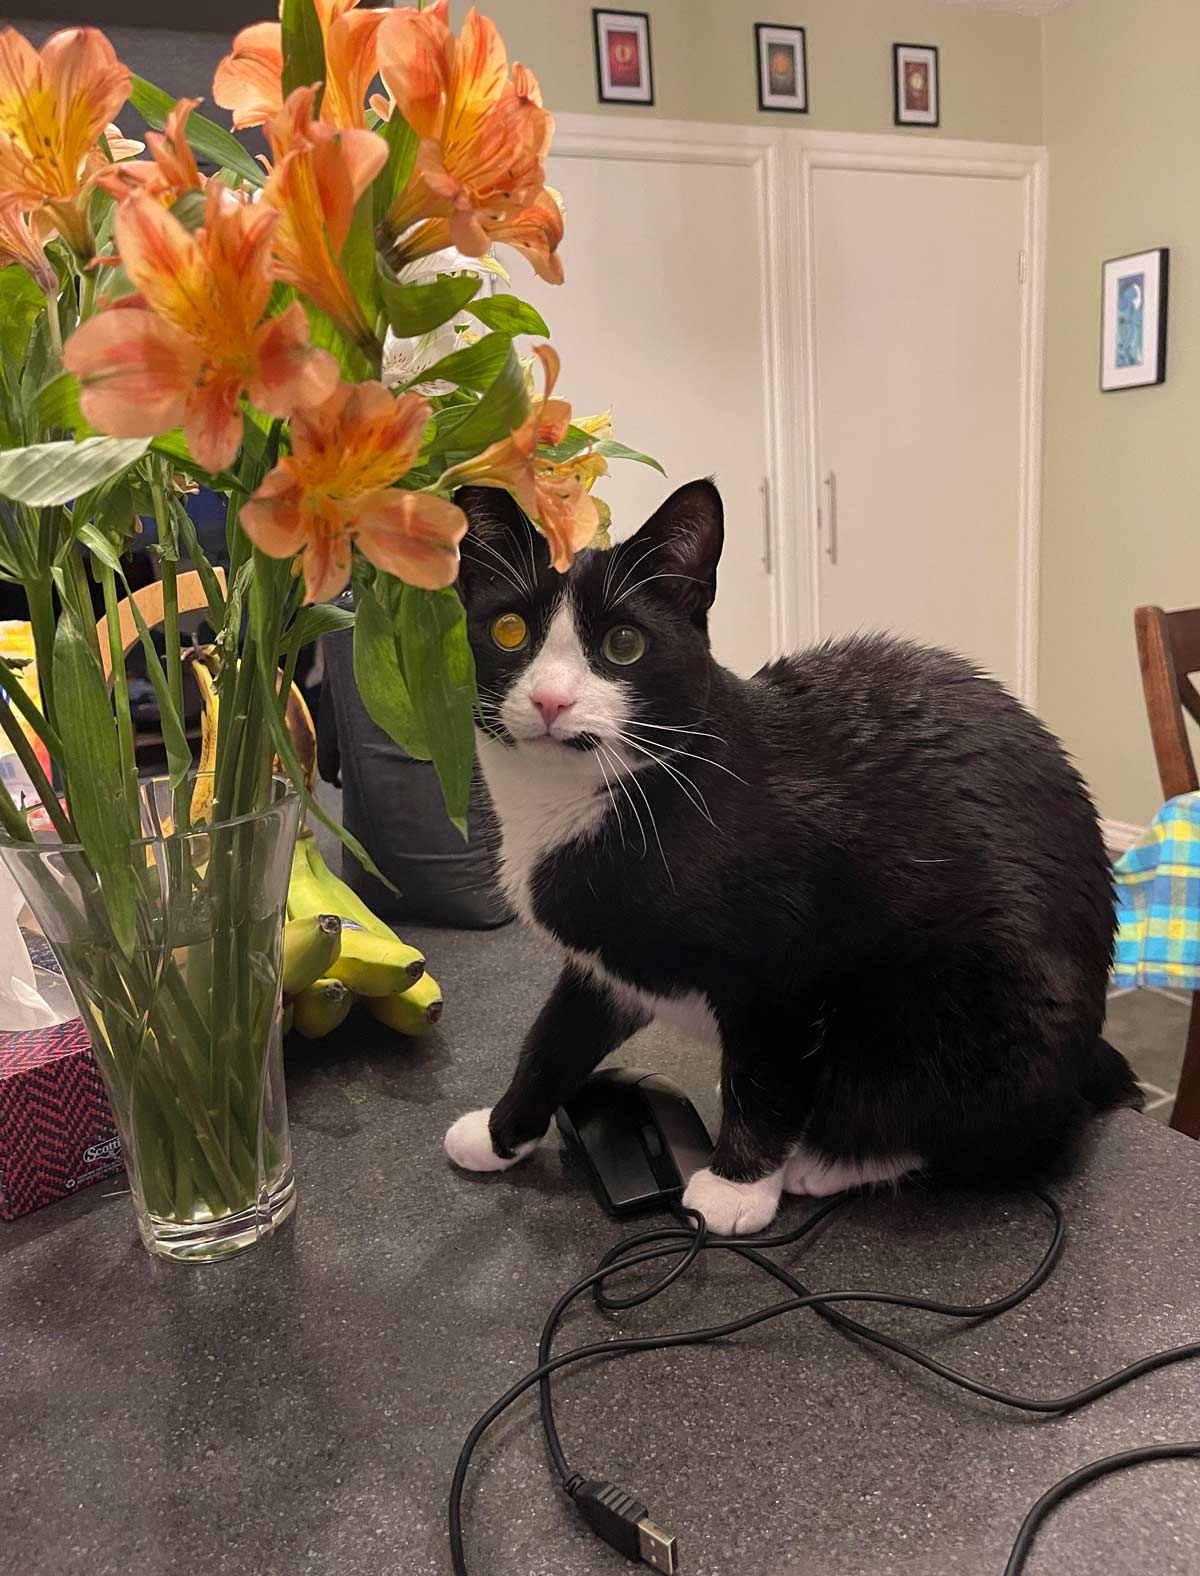 I’m beginning to wonder if Sylvester thinks his name is “Stop eating the fucking flowers”